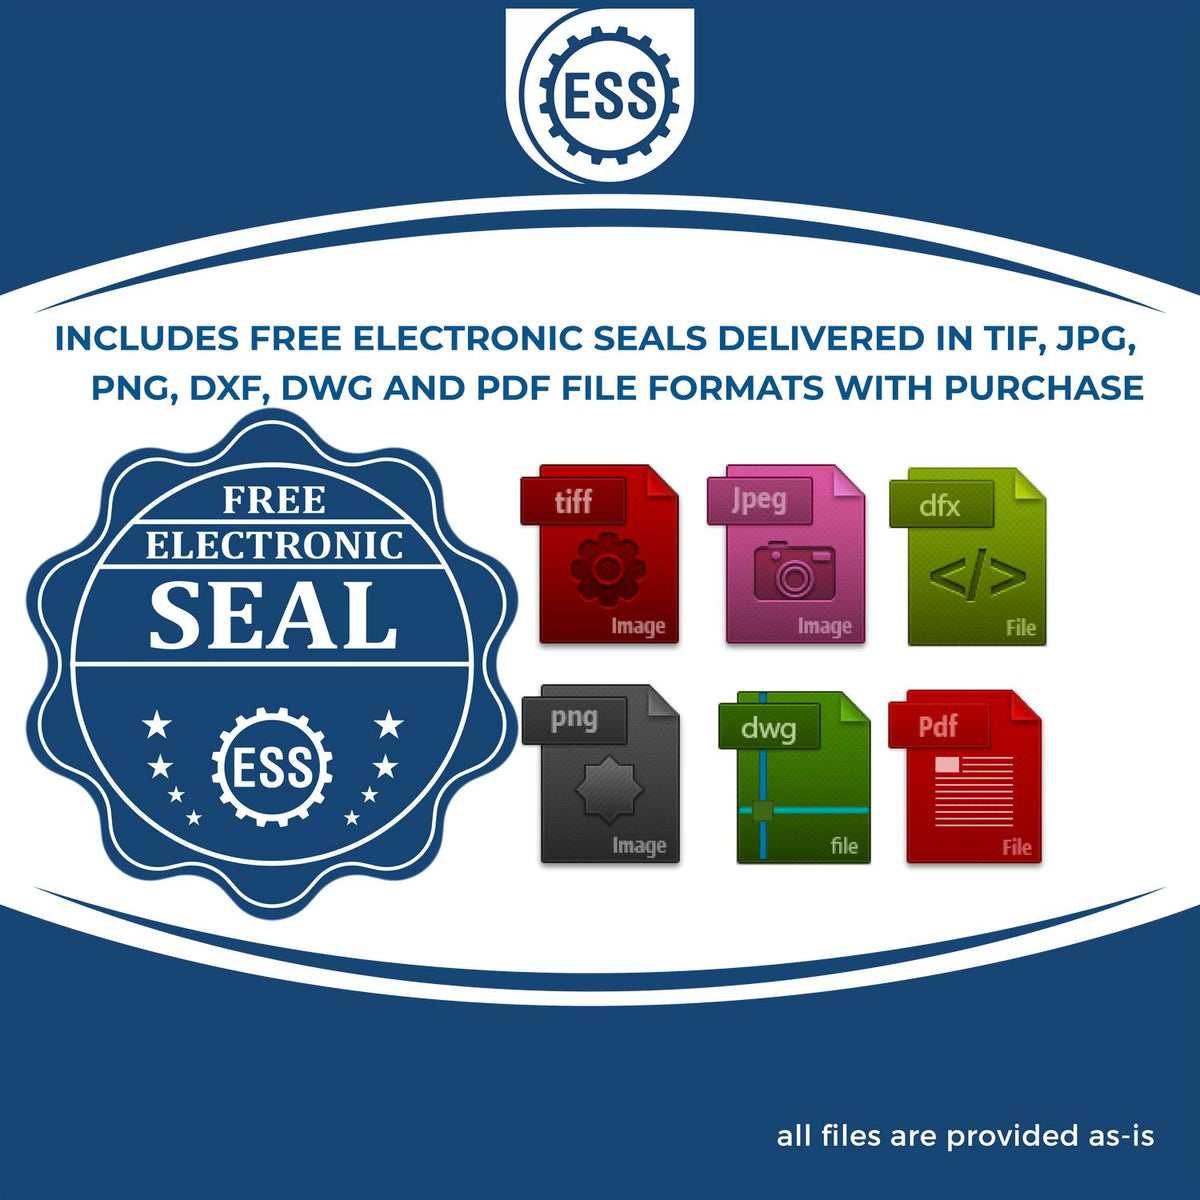 An infographic for the free electronic seal for the Handheld Maine Land Surveyor Seal illustrating the different file type icons such as DXF, DWG, TIF, JPG and PNG.